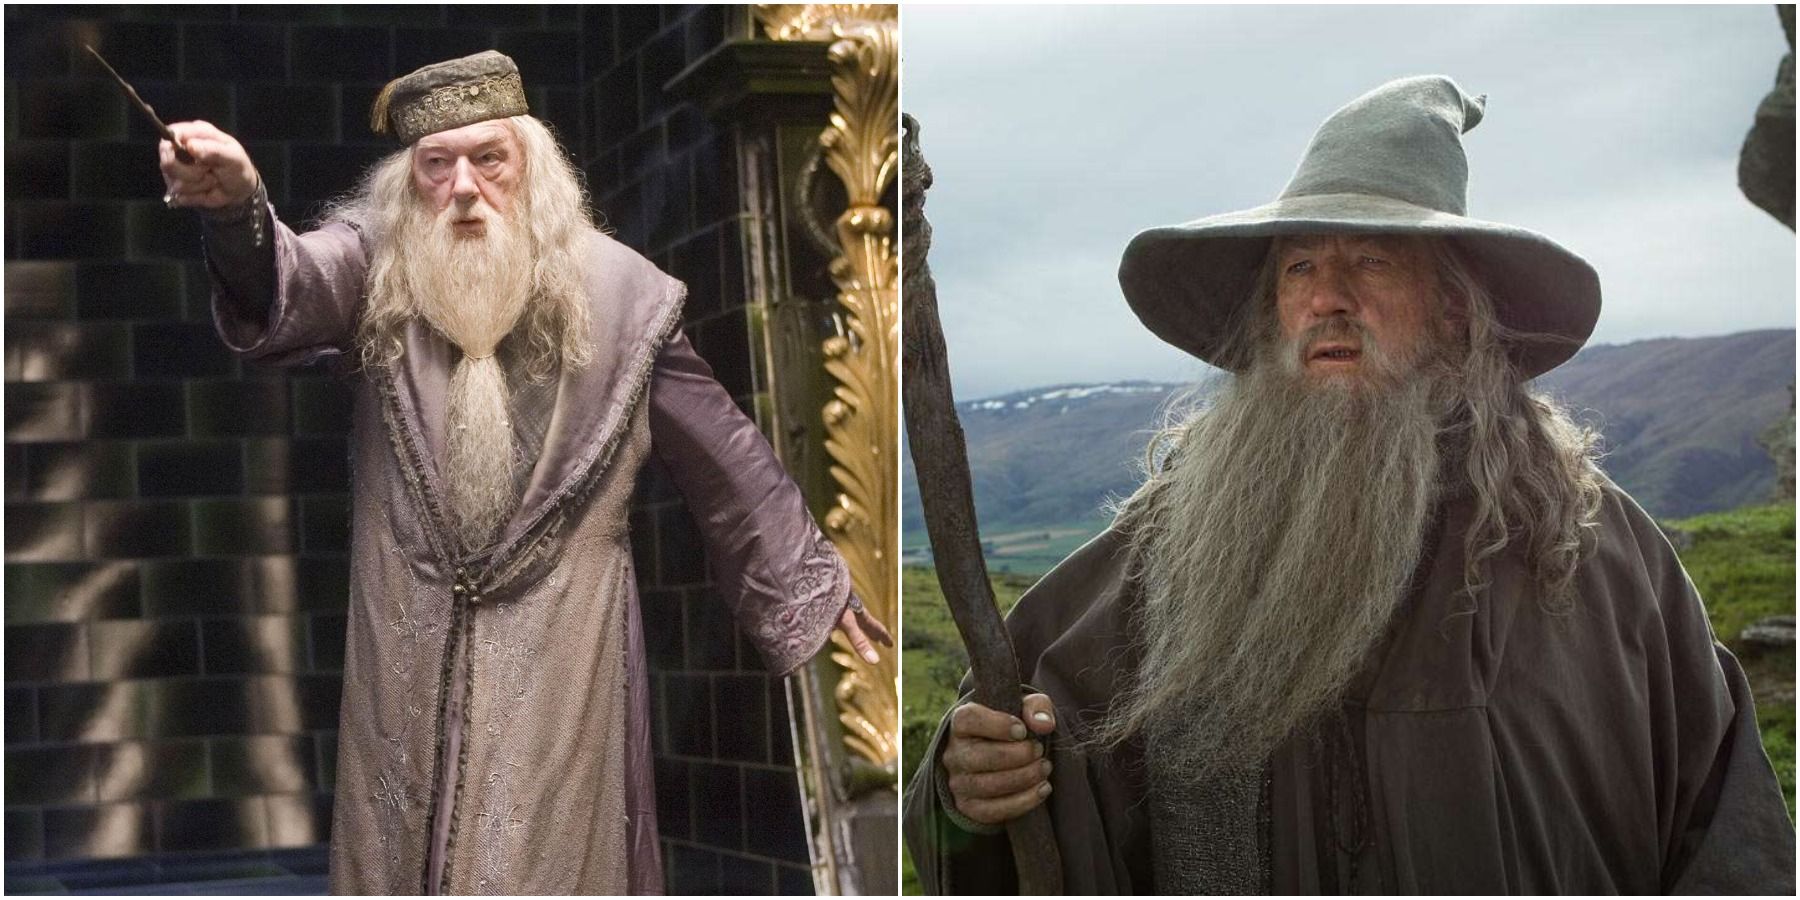 Dumbledore Vs. Gandalf The Grey: Who Would Win In A Fight?